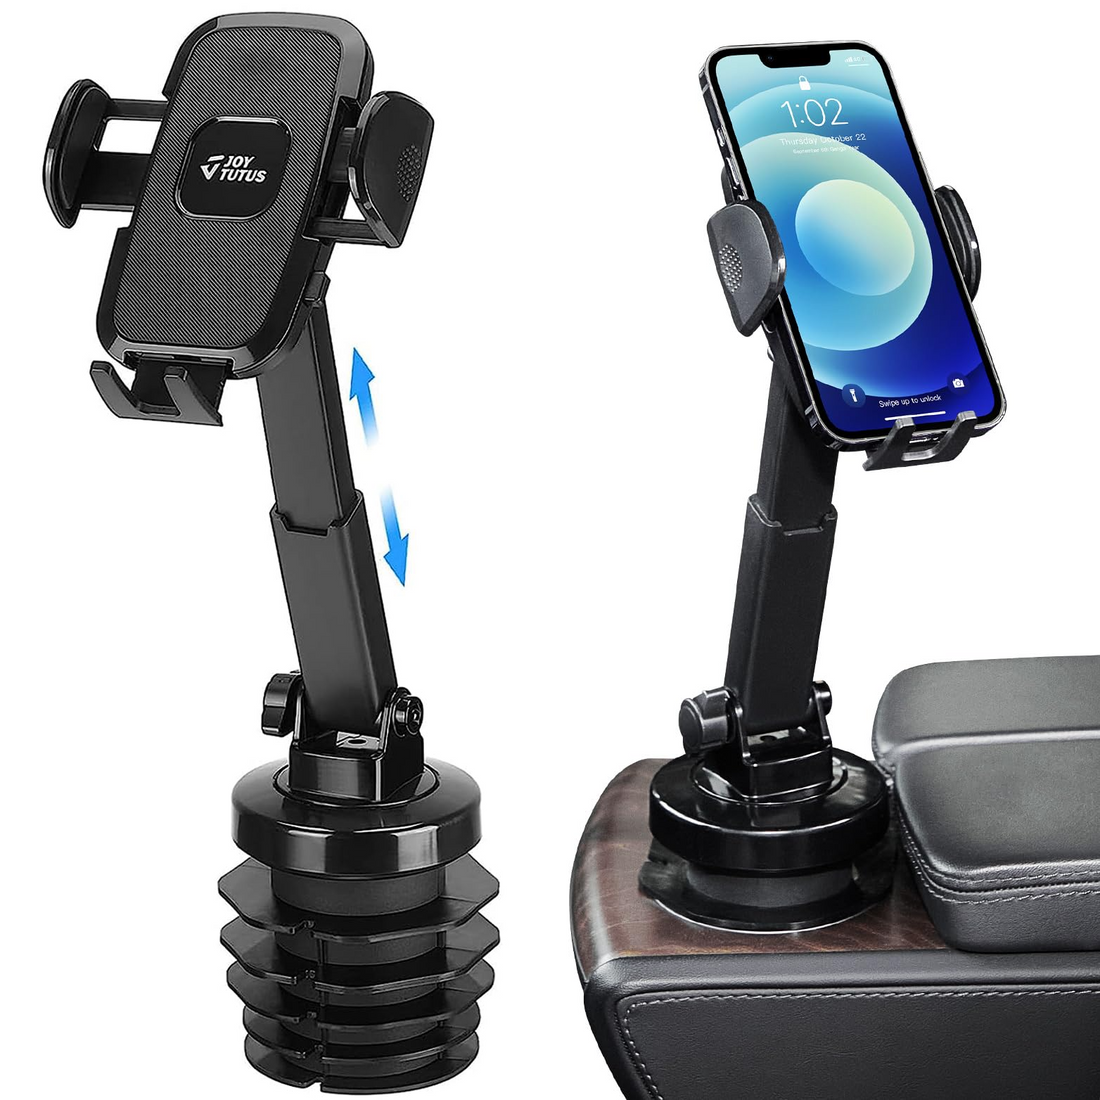 Car Cup Holder Phone Mount,Universal Adjustable for iPhone, Samsung, LG